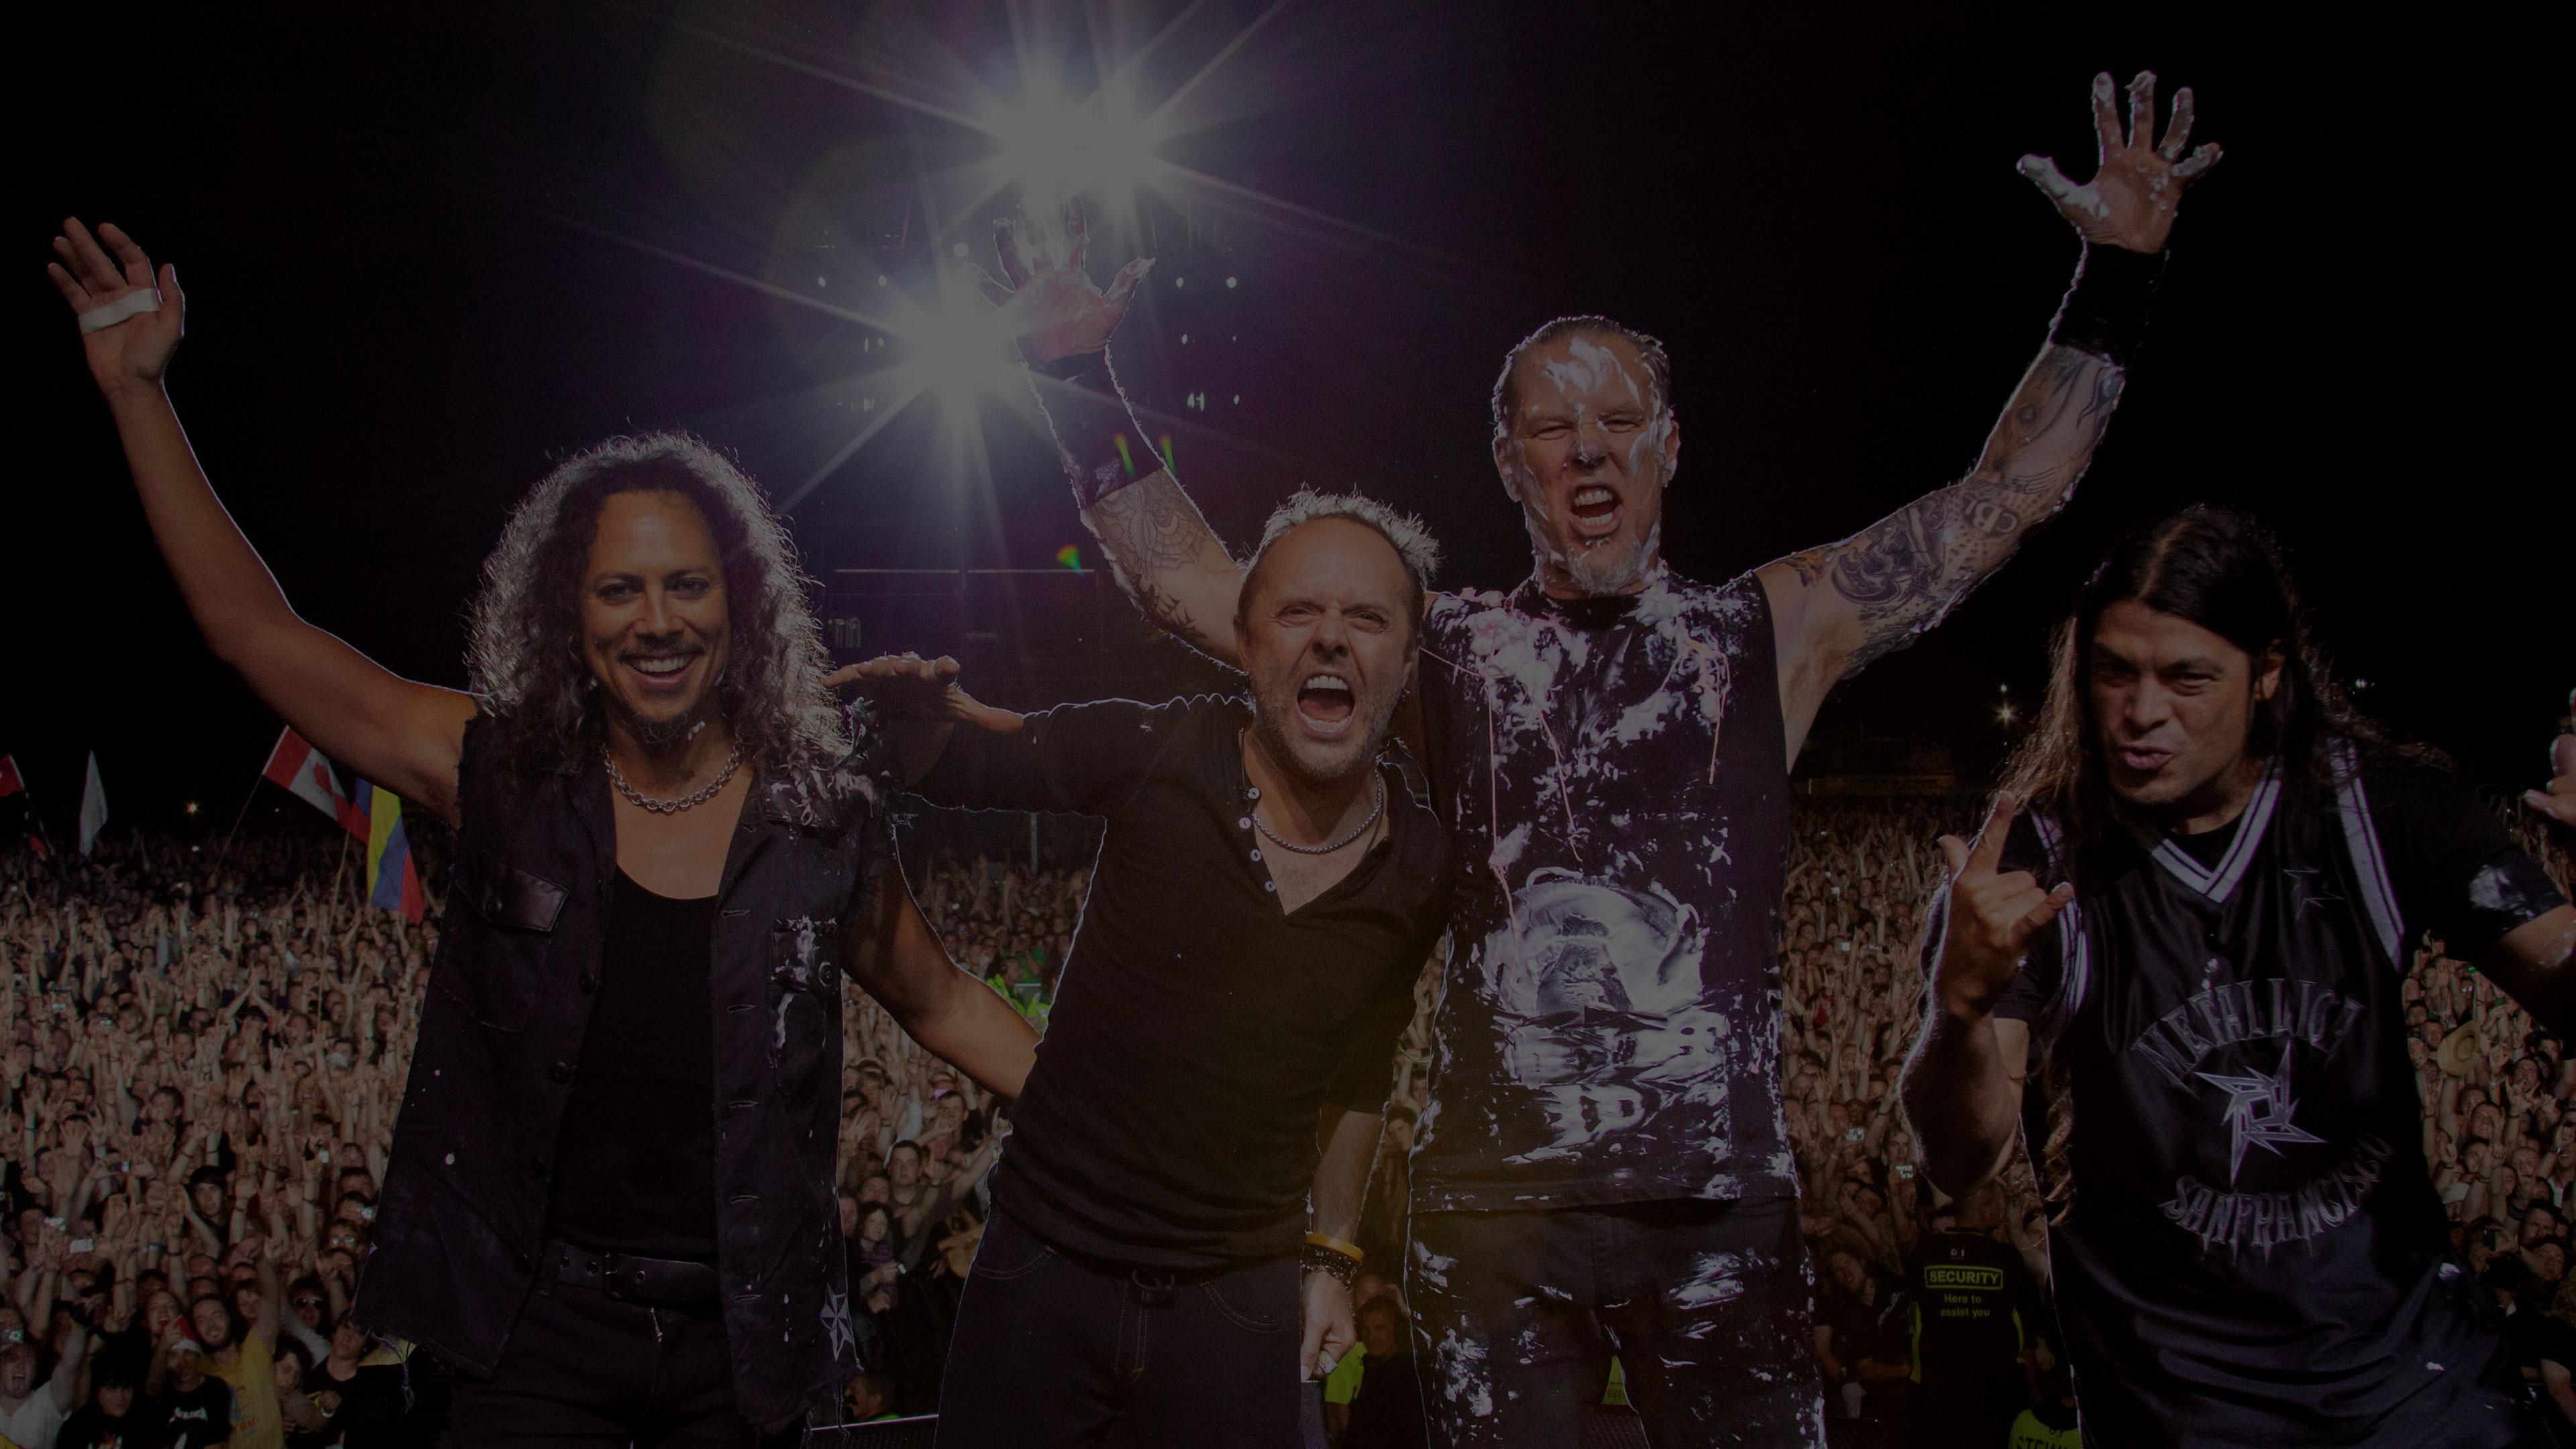 Banner Image for the photo gallery from the gig in Knebworth, England shot on August 2, 2009